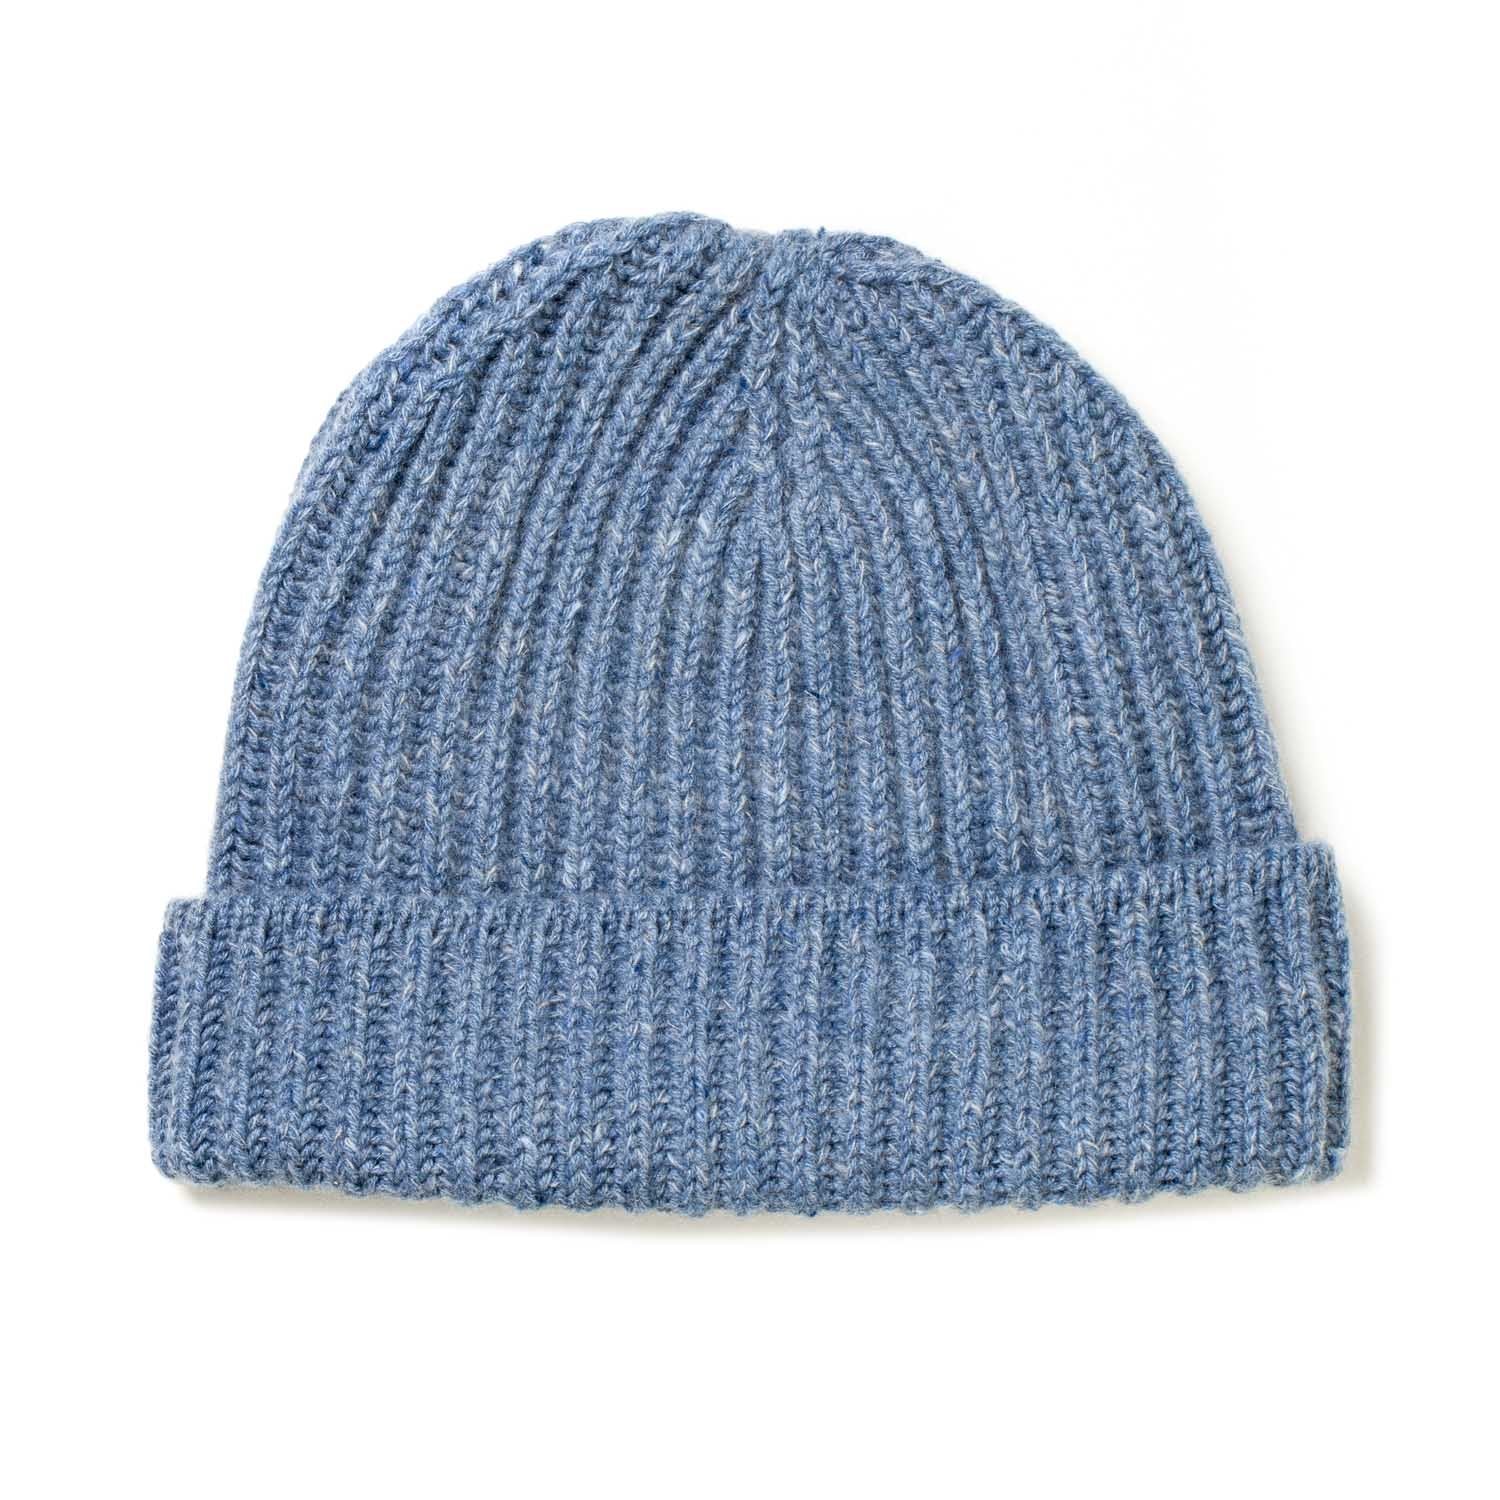 Fedeli's Cashmere Beanies "At it's Best!"